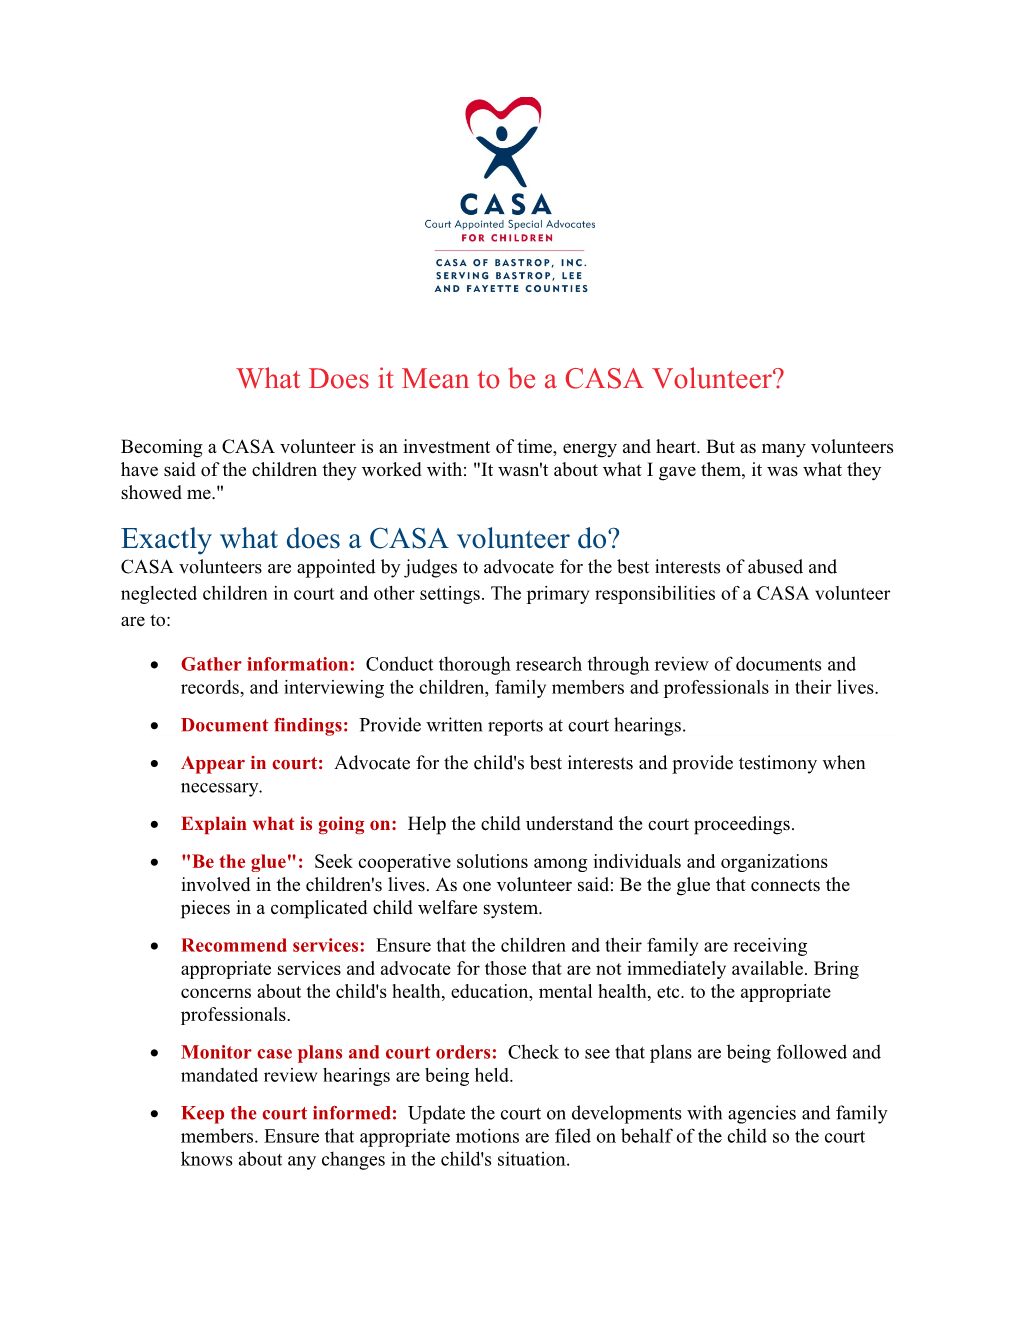 What Does It Mean to Be a CASA Volunteer?